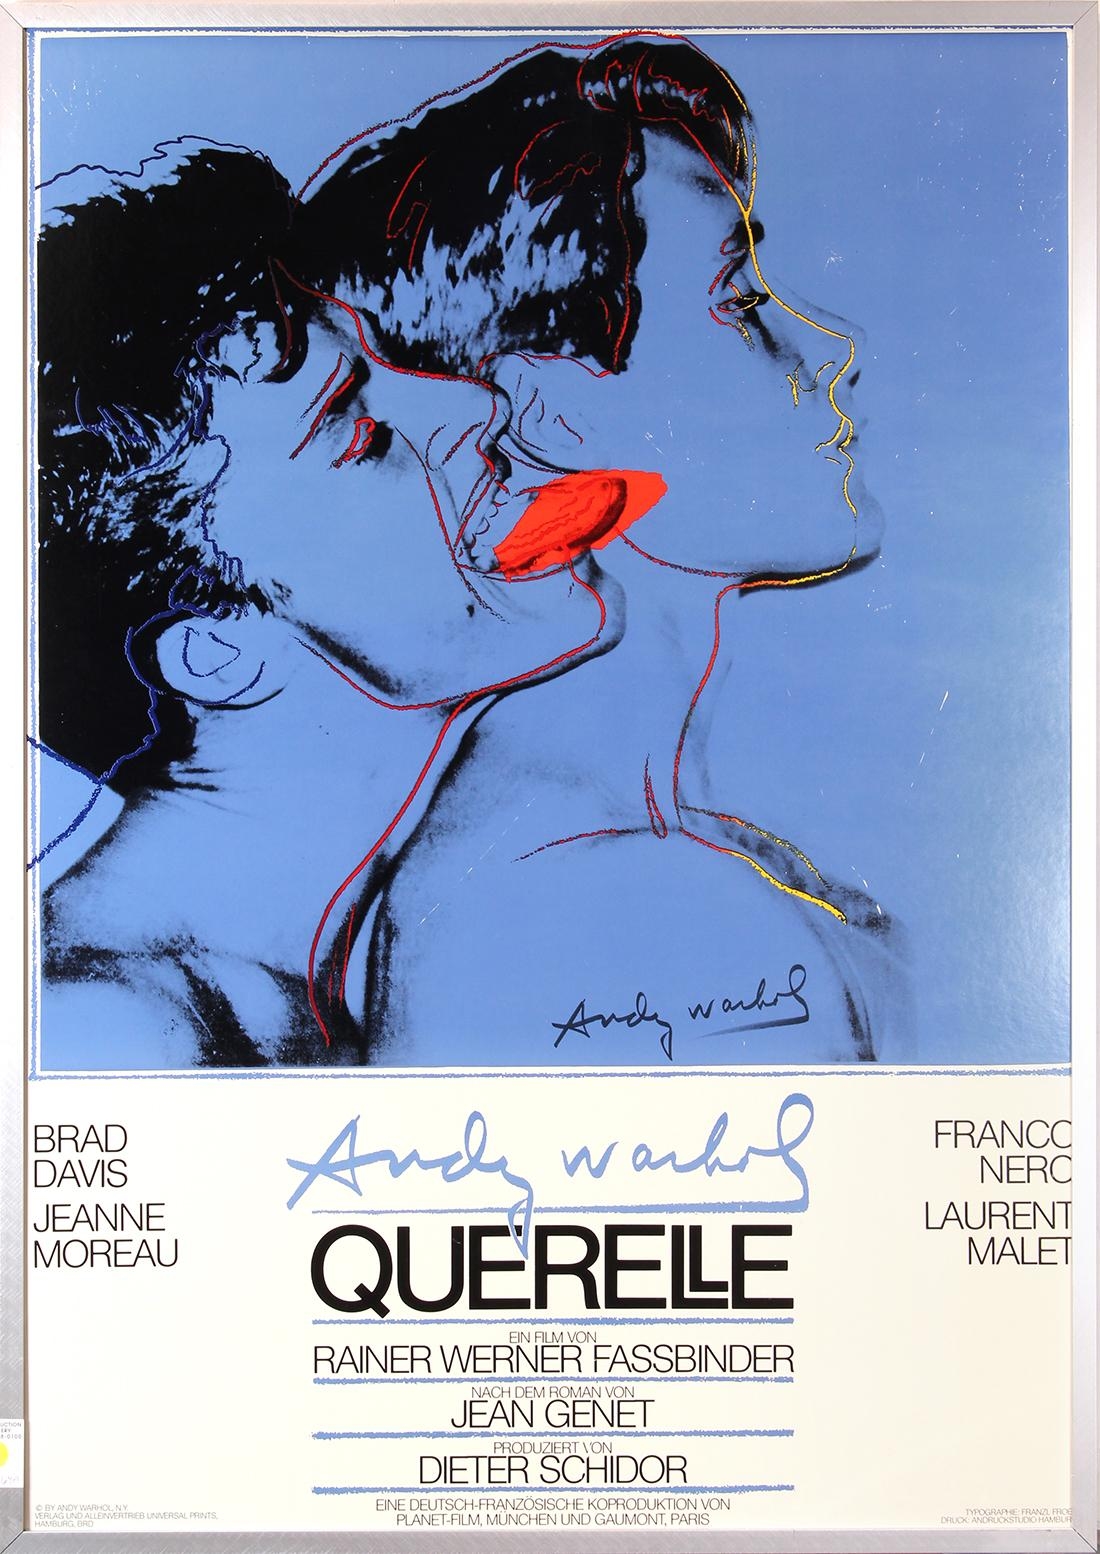 Querelle (Blue) by Andy Warhol, 1982